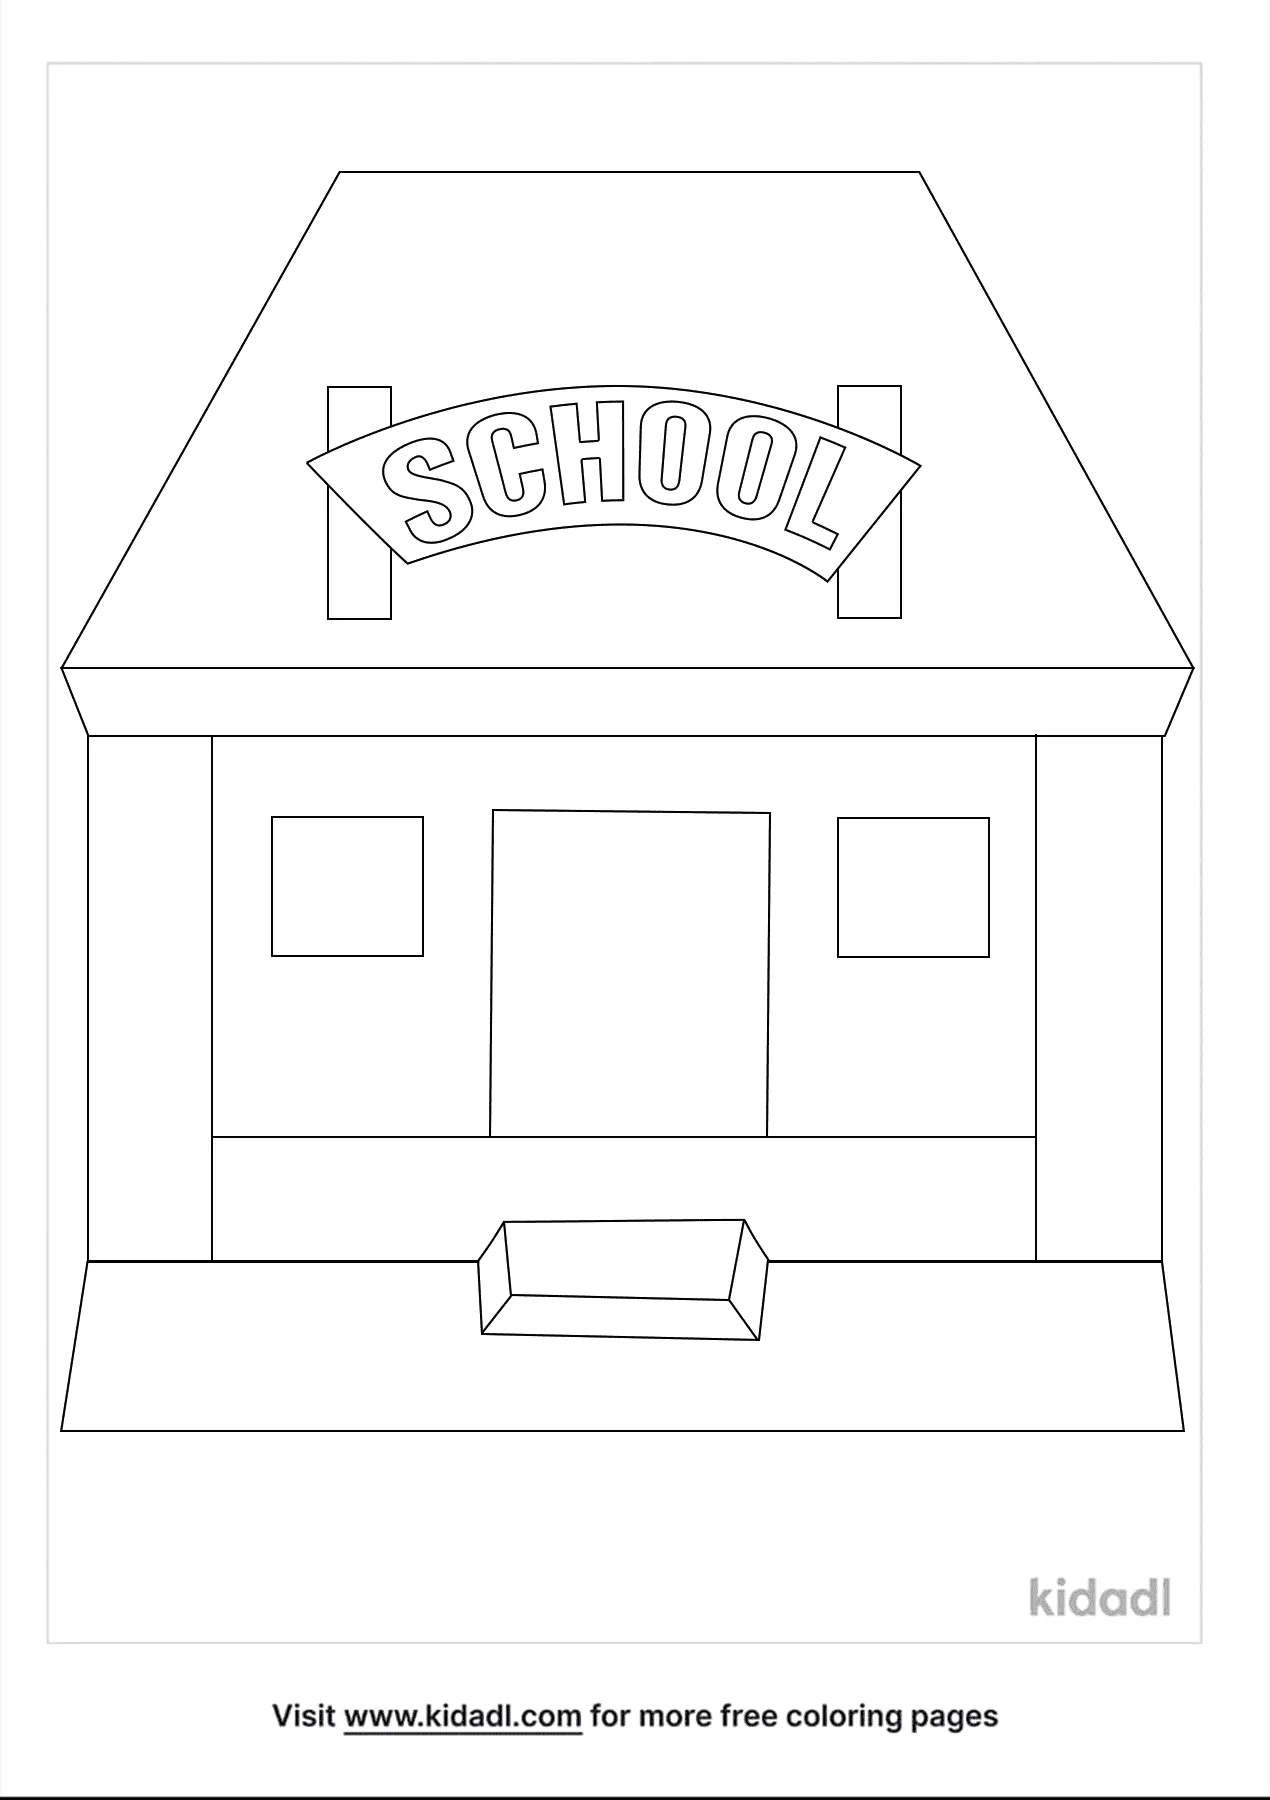 Free Elementary School Coloring Page   Coloring Page Printables ...